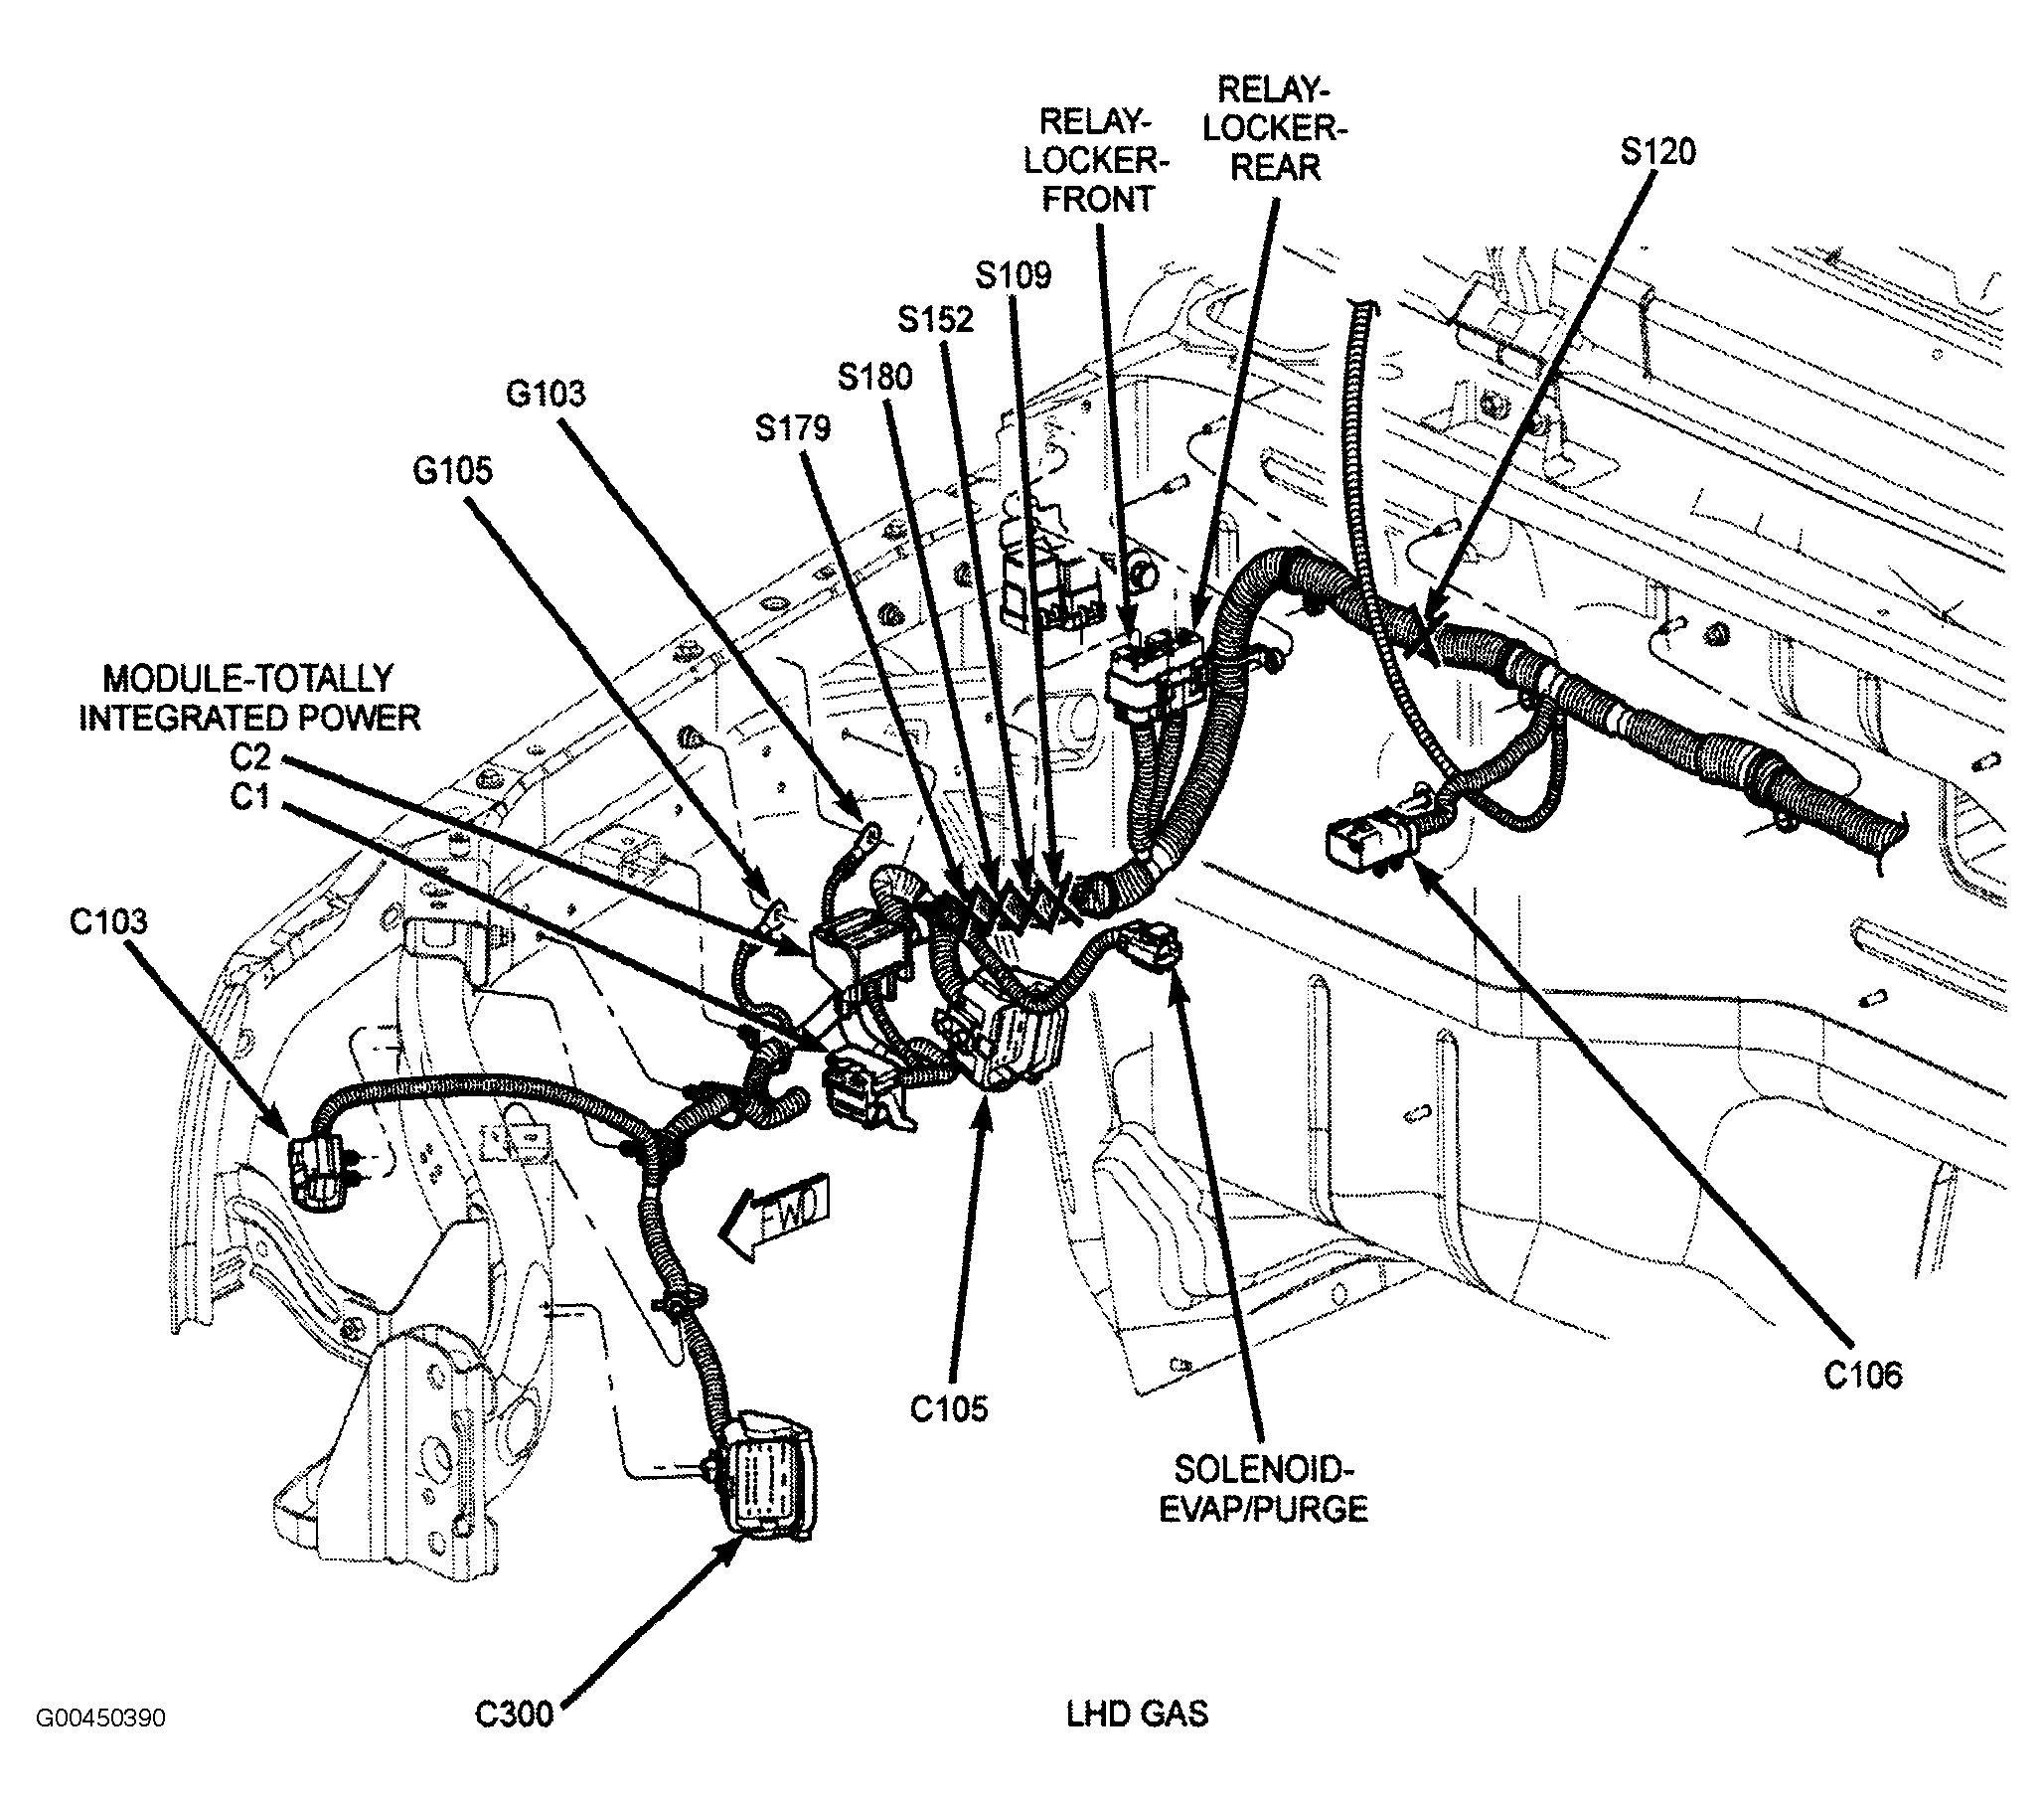 2007 JEEP Wrangler – Wiring diagrams for cars